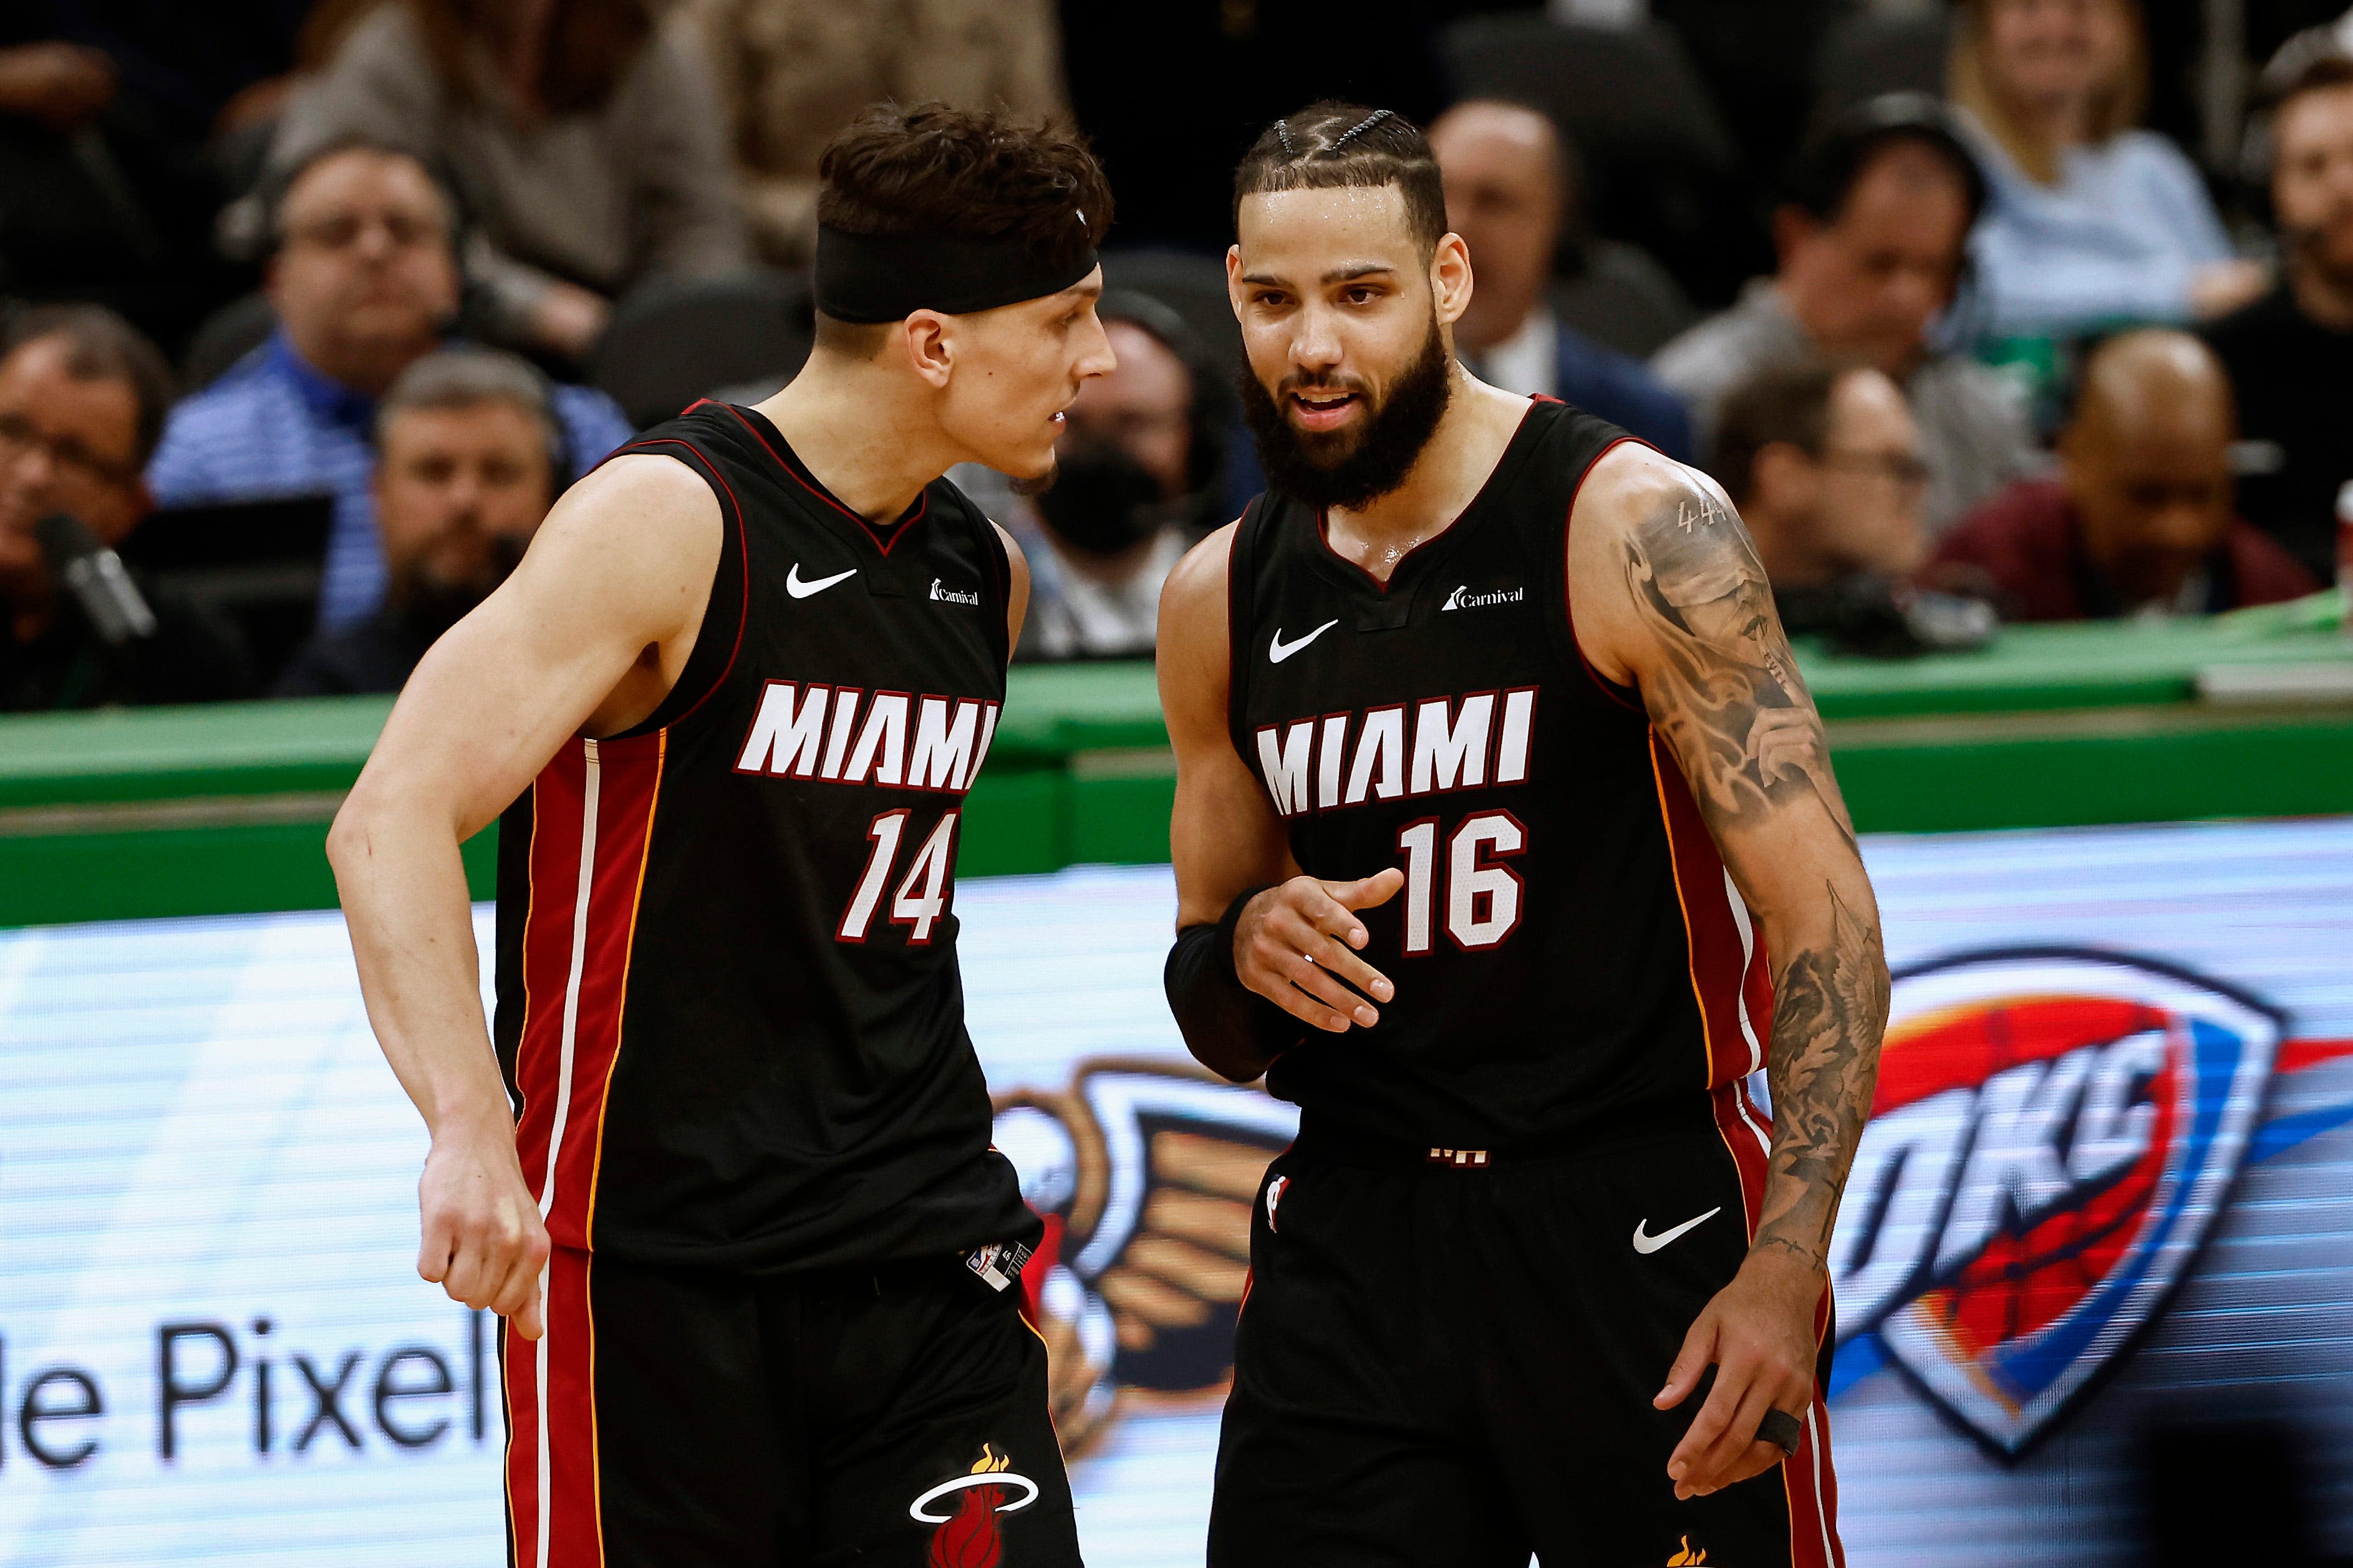 Celtics vs. Heat: Game 3 predictions, odds, TV schedule for NBA Eastern Conference series